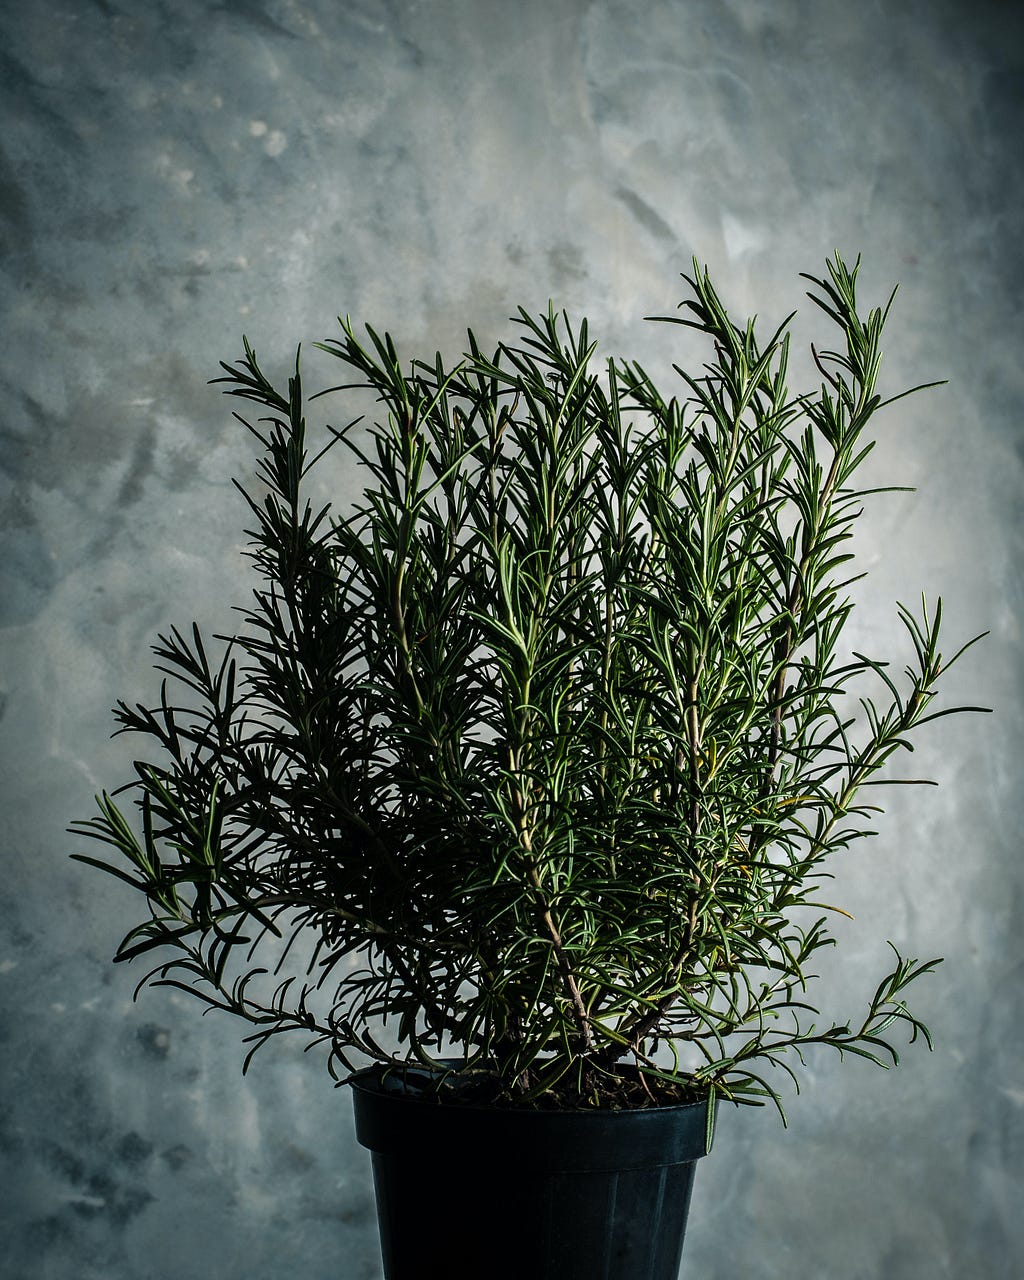 An upright rosemary plant in a simple pot looks striking against a bluish-gray background.